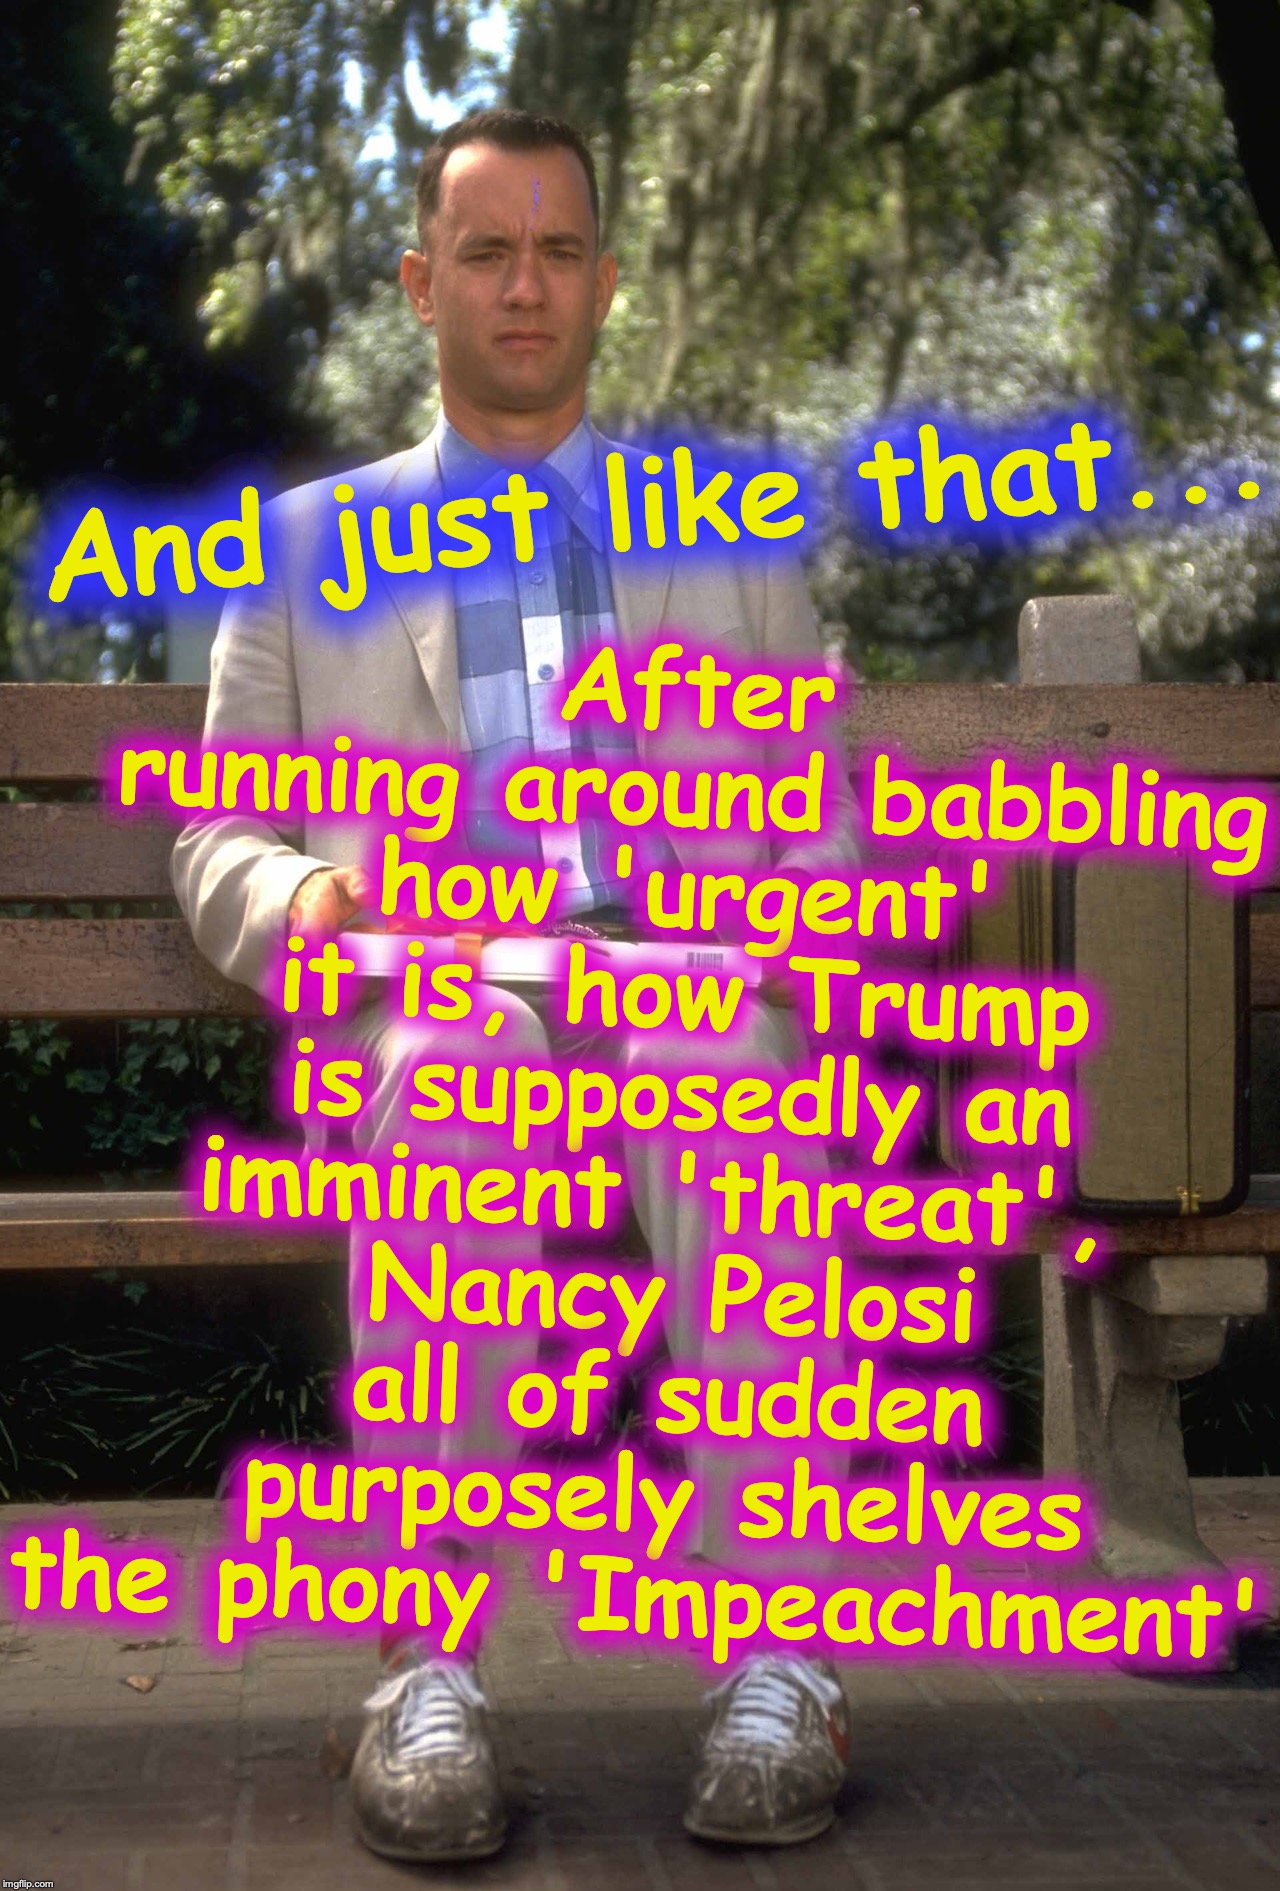 you have to be a special kind to sign-on to the tripe | After running around babbling how 'urgent' it is, how Trump is supposedly an imminent 'threat', 
Nancy Pelosi all of sudden purposely shelves the phony 'Impeachment'; And just like that... | image tagged in pelosi,impeachment | made w/ Imgflip meme maker